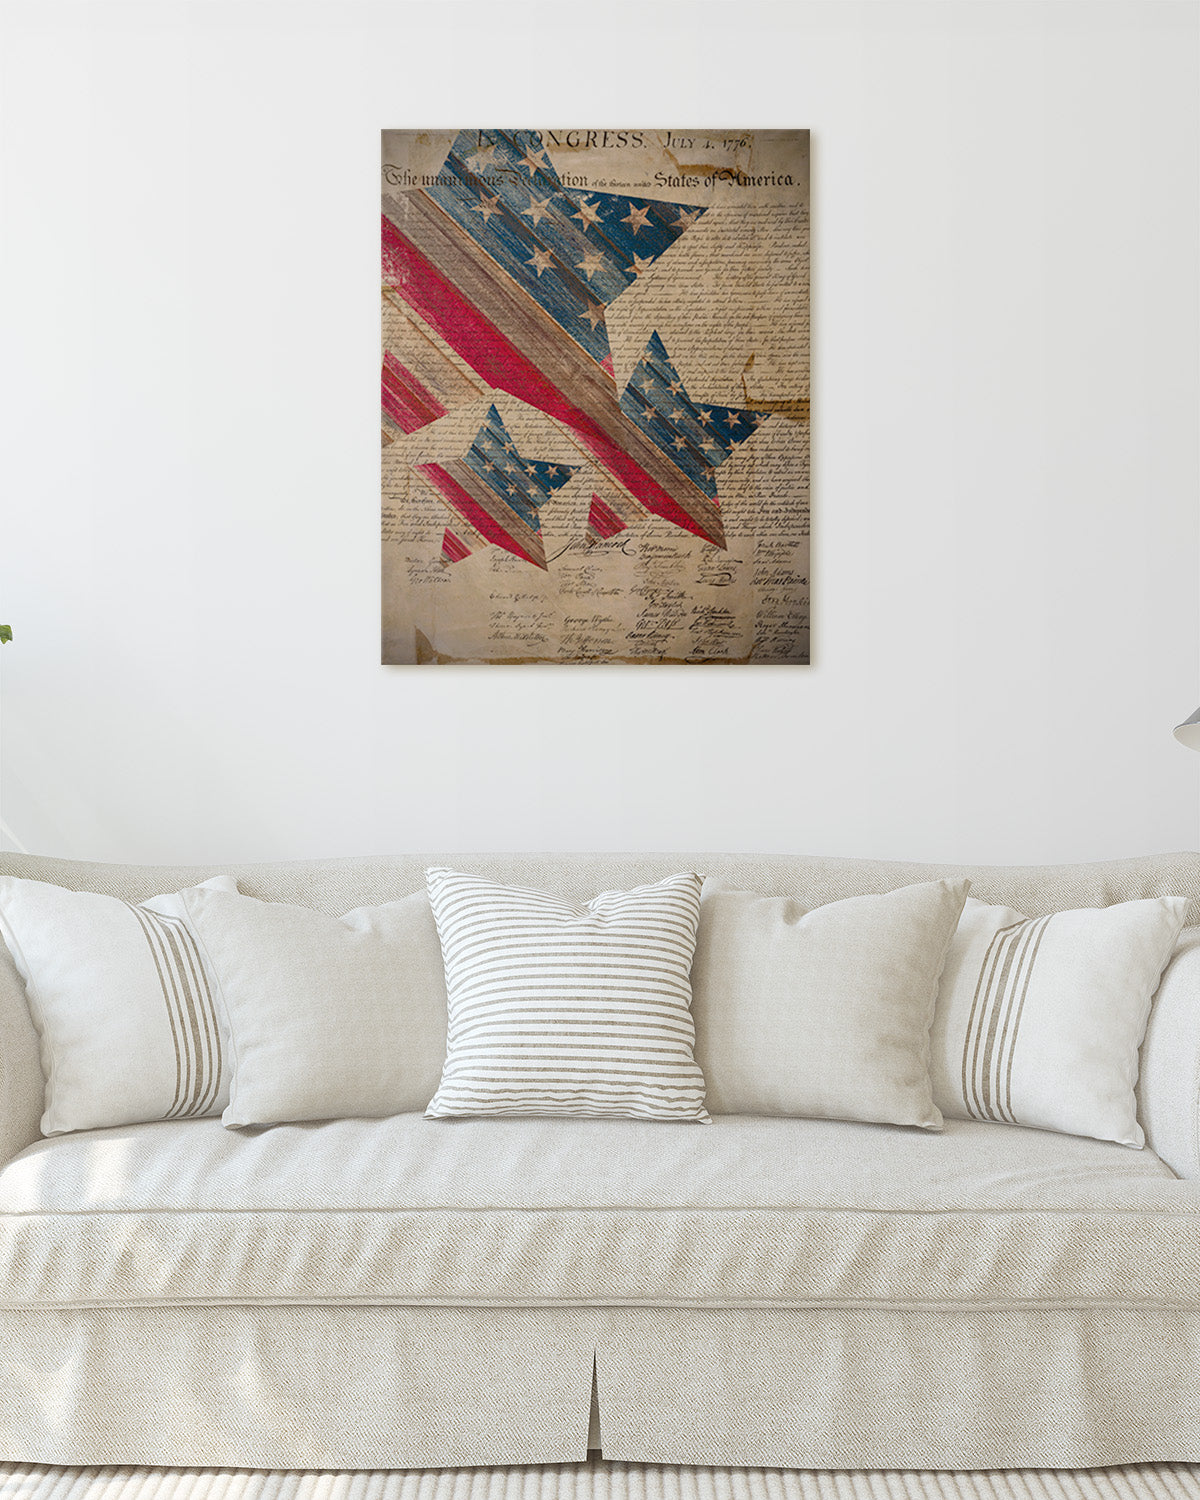 Declaration of Independence Wall Art Canvas - Patriotic Wall Decor - Memorial Day, 4th of July Gift for Americana, US History Buffs, Military Veterans Patriots